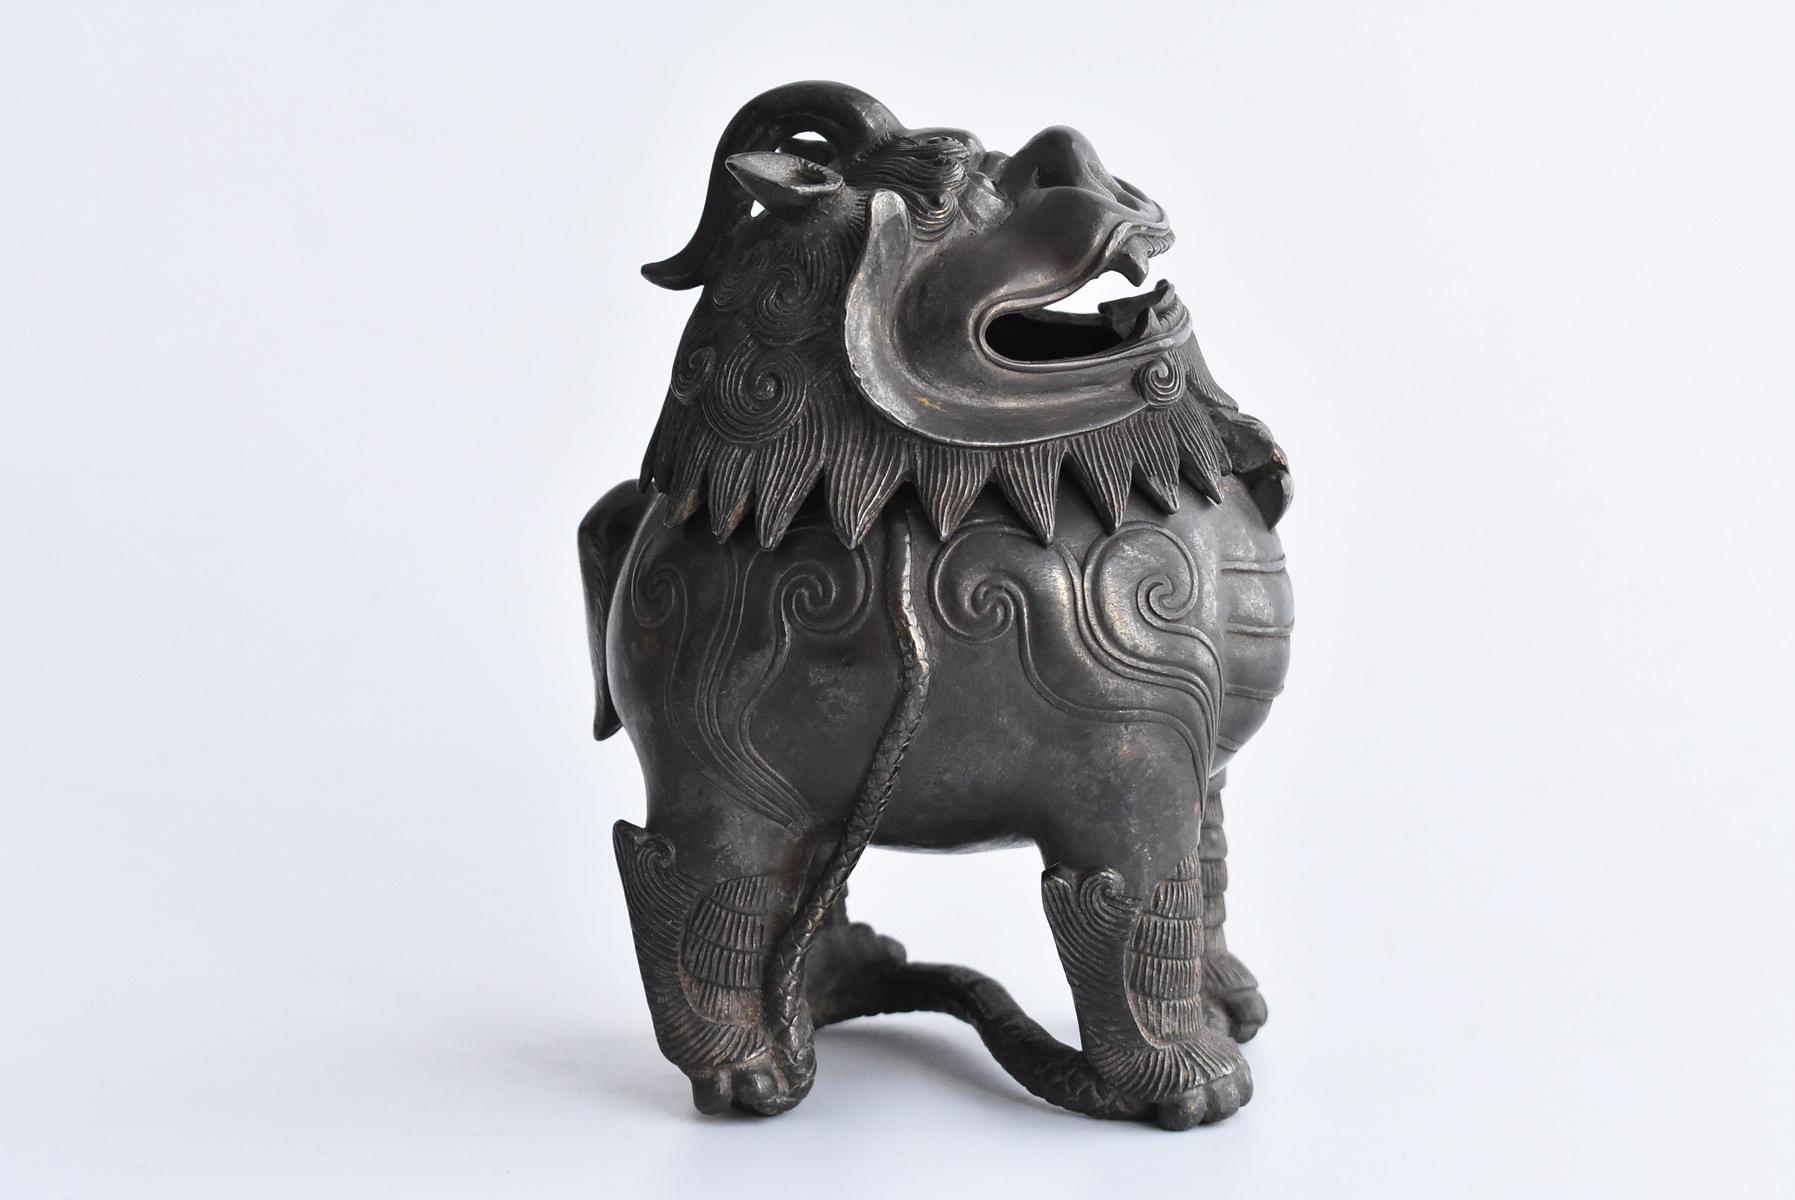 19th Century Old Japanese Copperware or Incense Burner in the Shape of a Lion/Carved Figurine